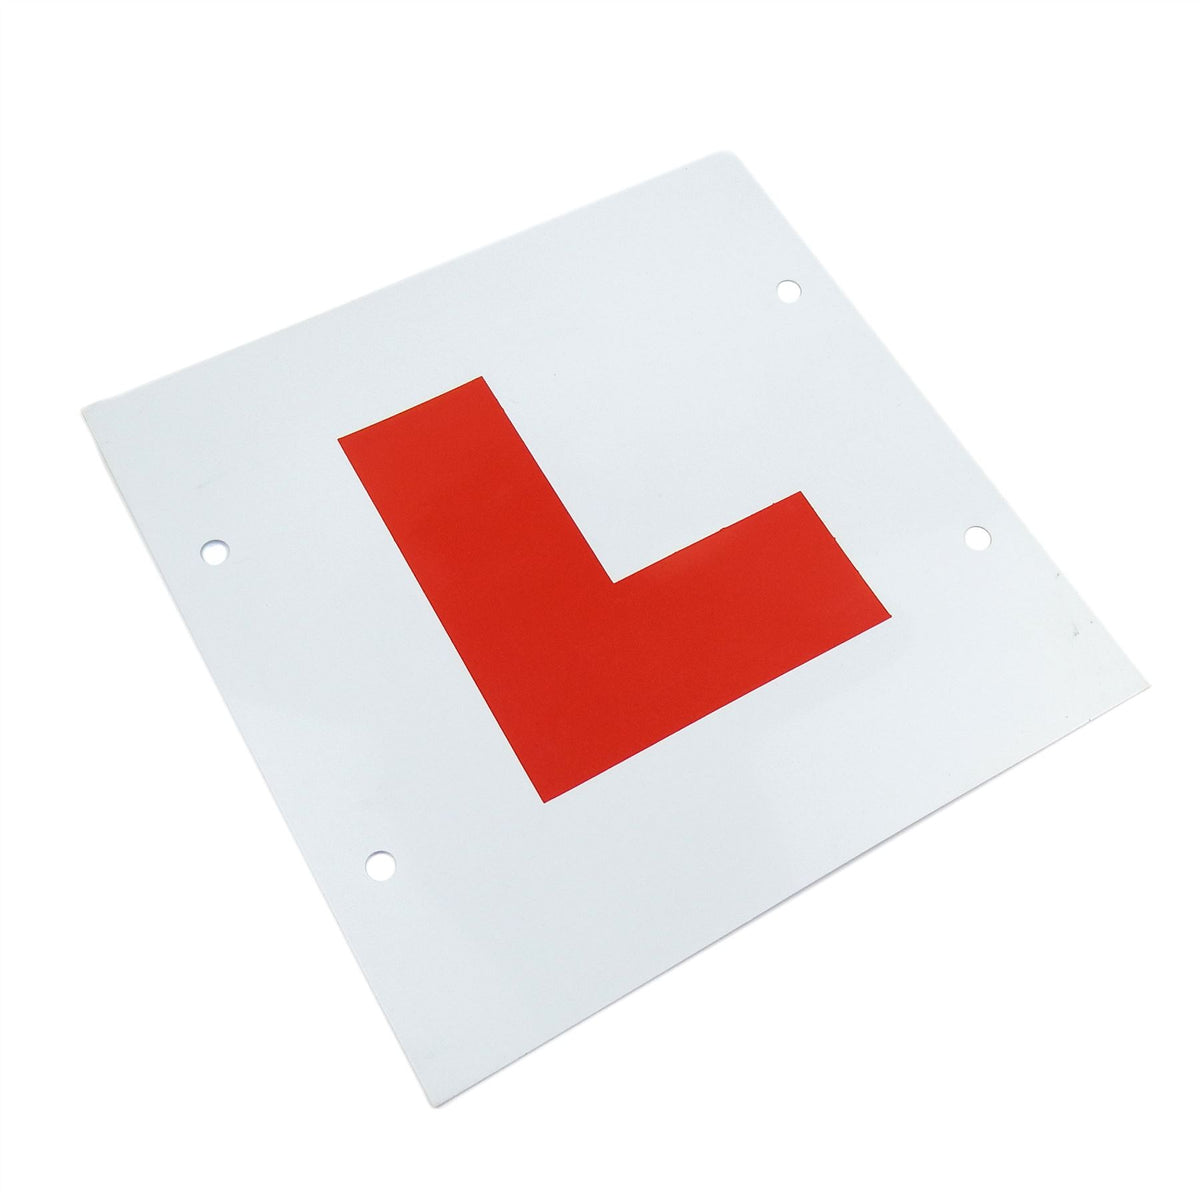 Learners L Plate - Tie On